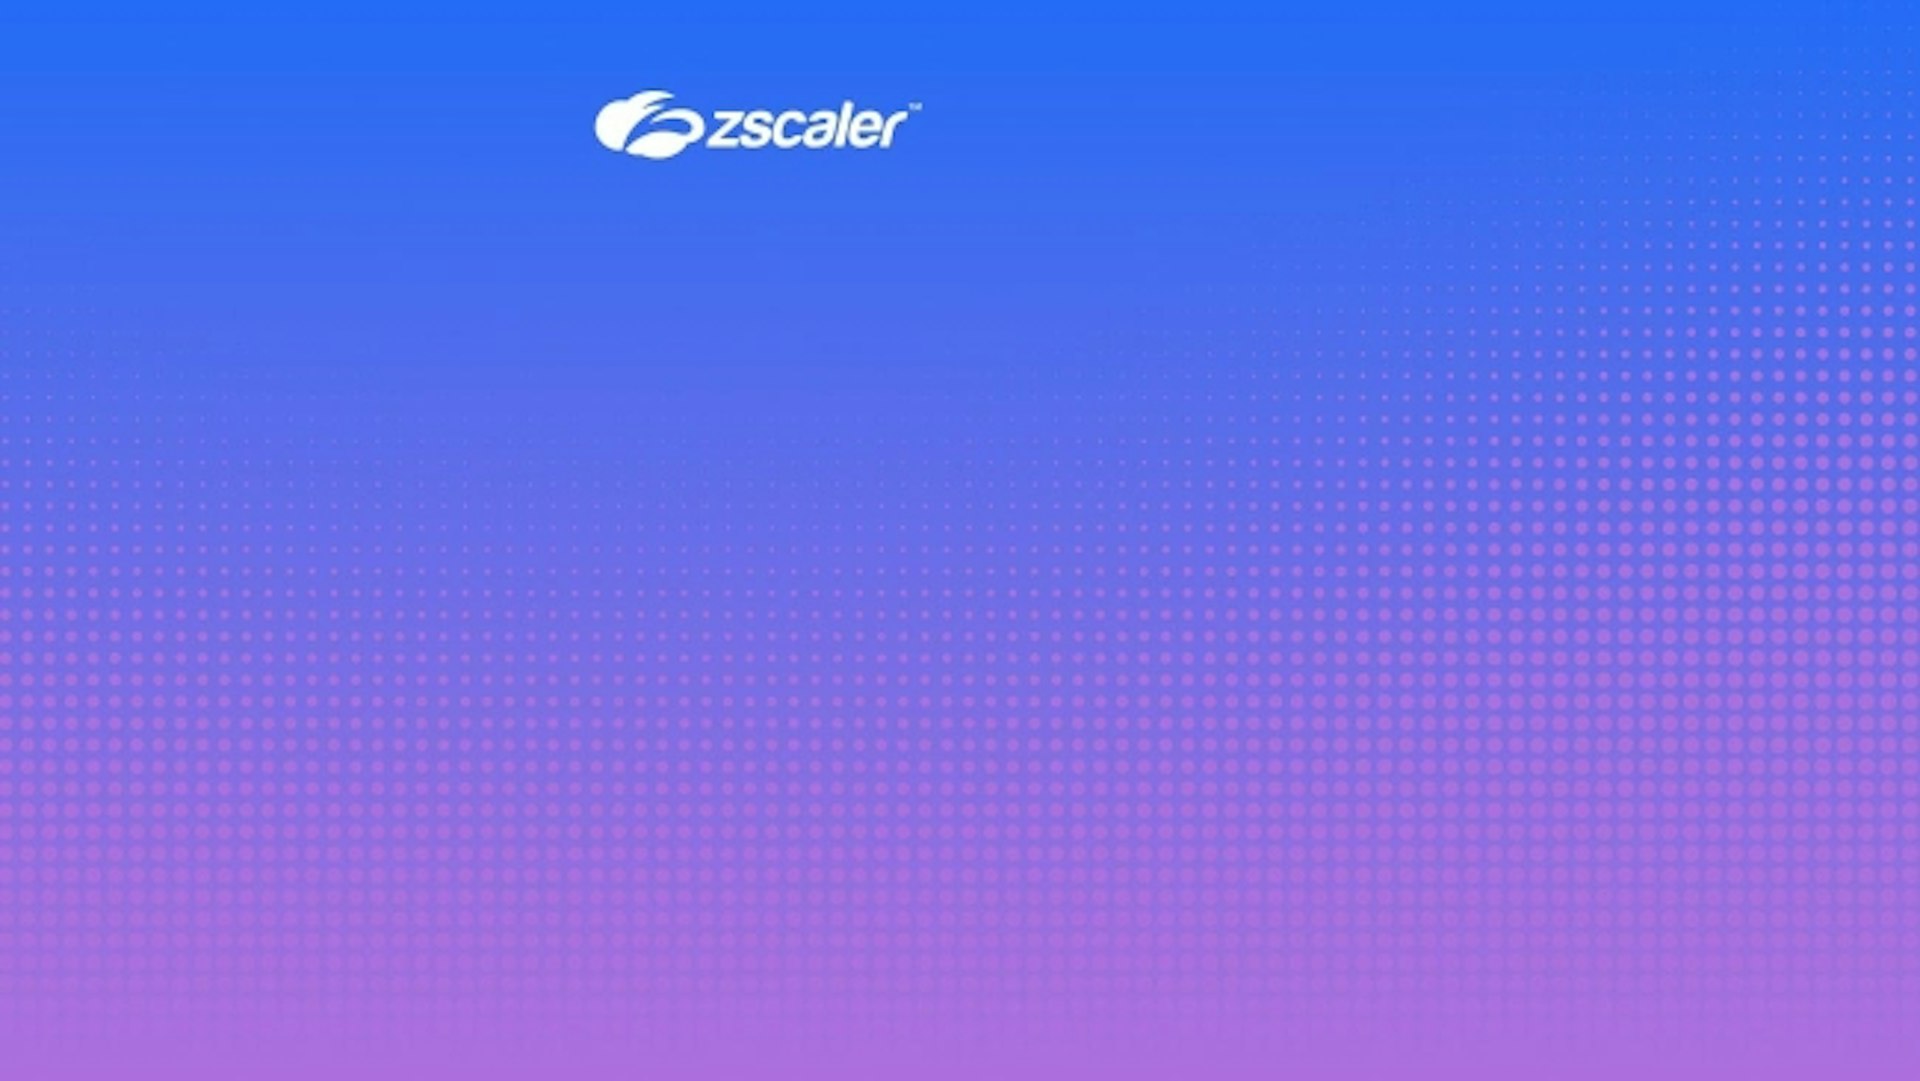 Securing Private Equity Investments, Increasing Cyber Resiliency, and Accelerating Deal Value with Zscaler